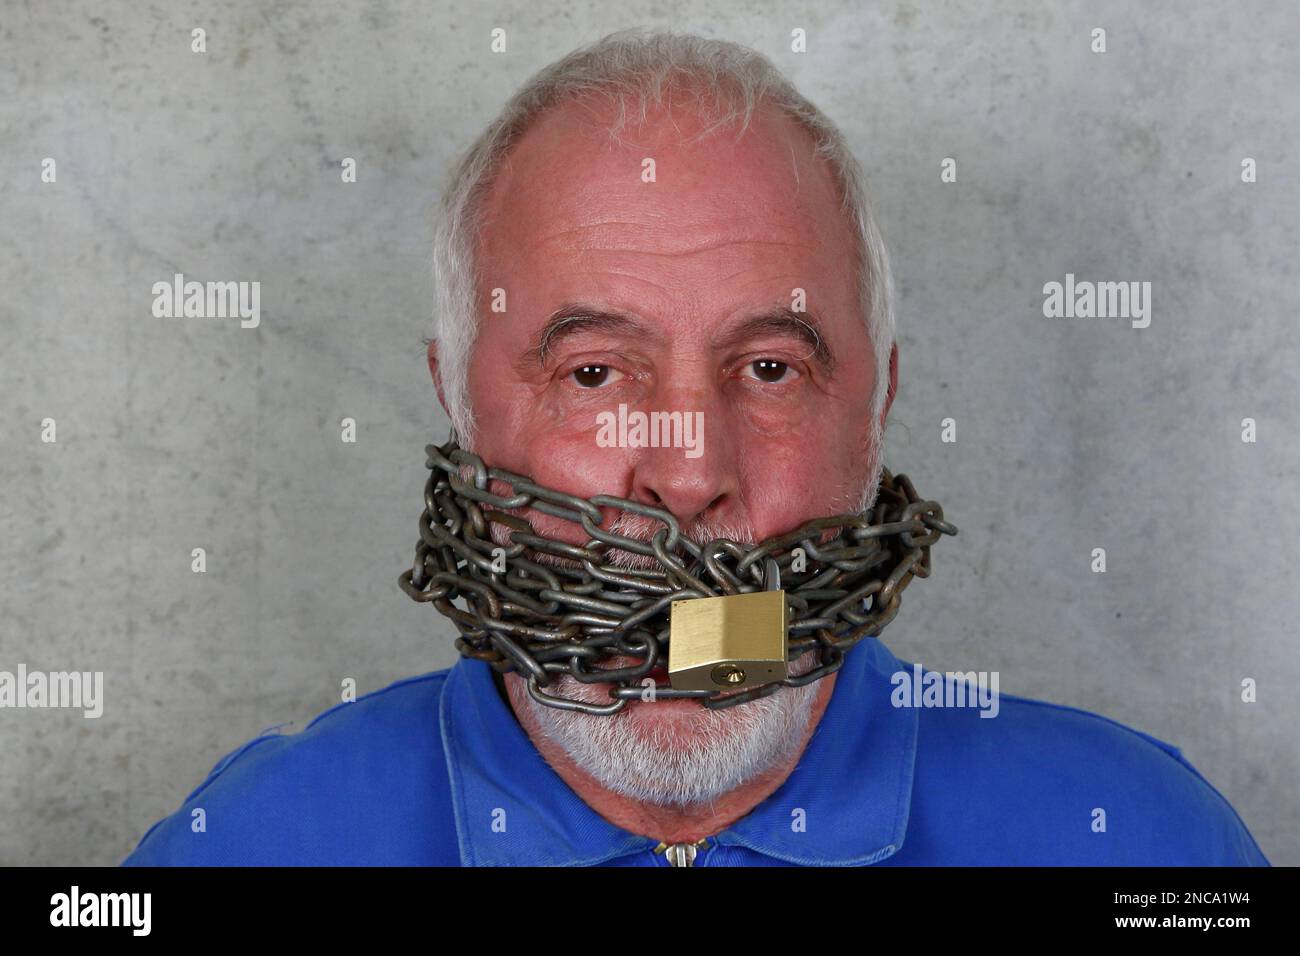 Autocracy, the end of free speech. Portrait of a man in front of a cold concrete wall with his mouth locked with a steel chain. Stock Photo